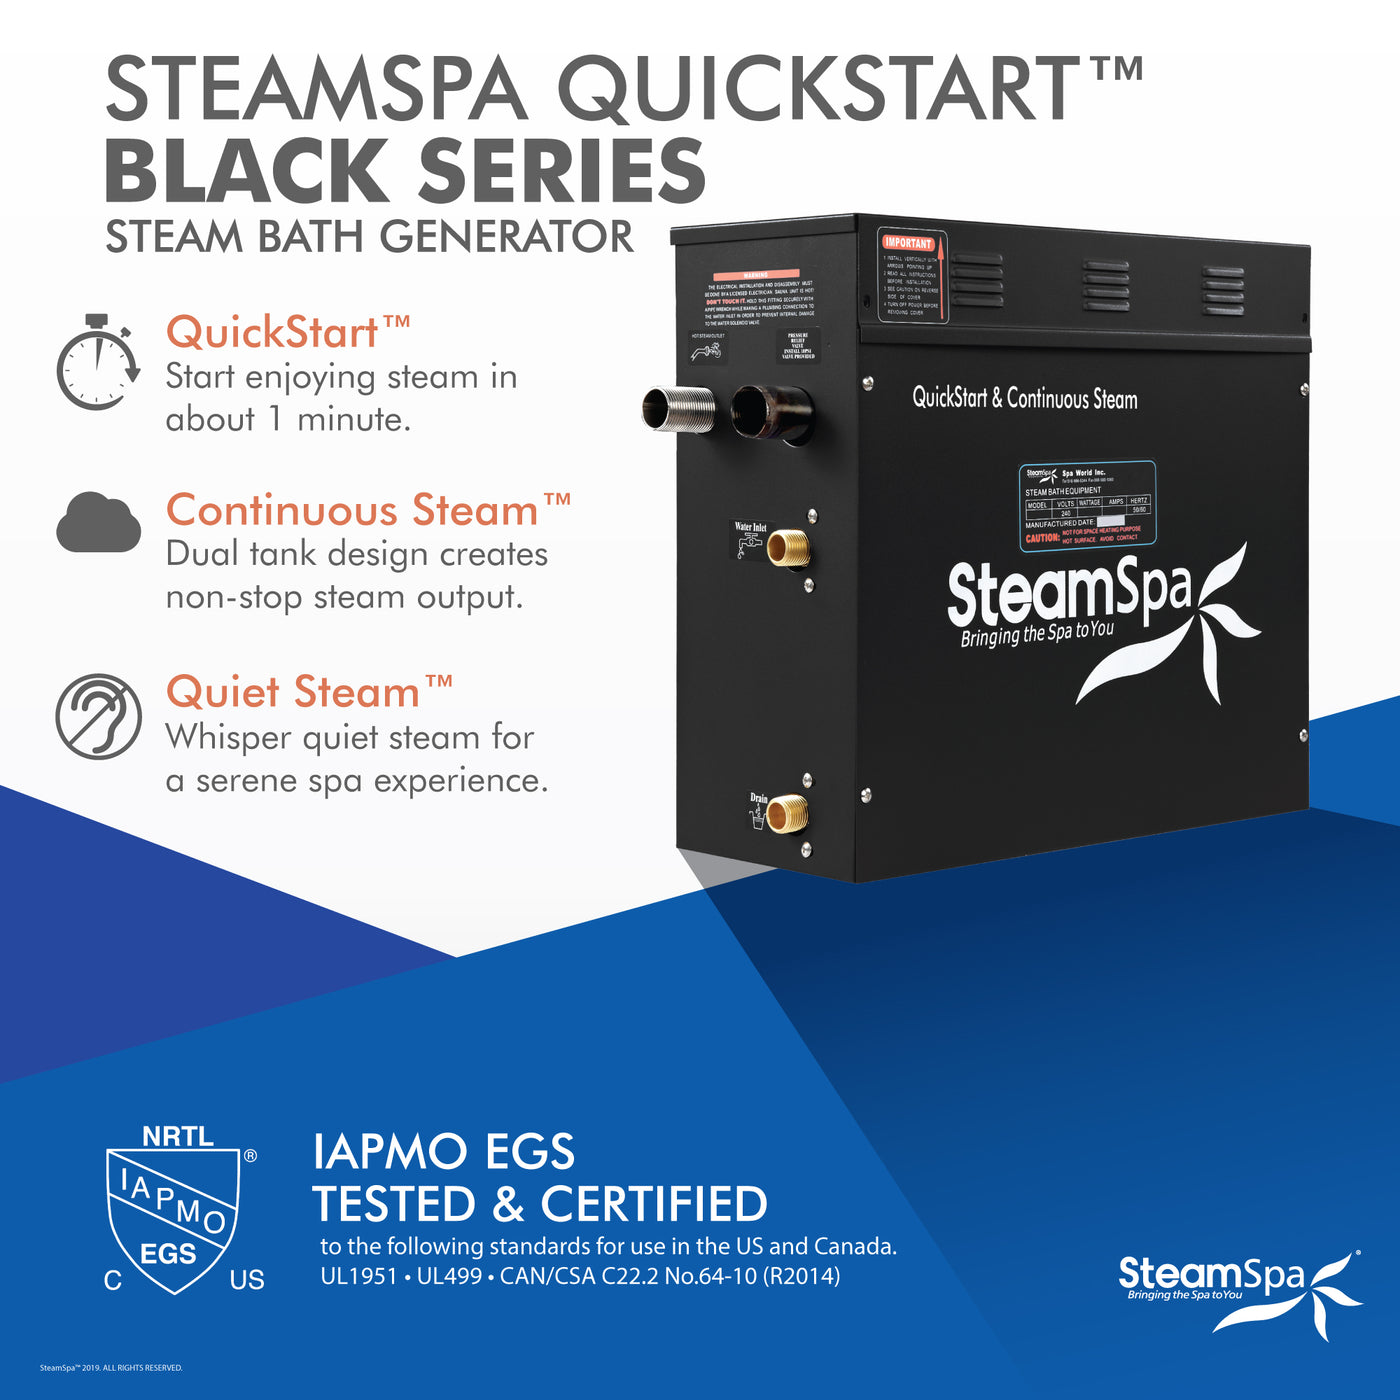 Black Series WiFi and Bluetooth 2 x 7.5kW QuickStart Steam Bath Generator Package with Dual Aroma Pump in Brushed Nickel BKT1500BN-ADP